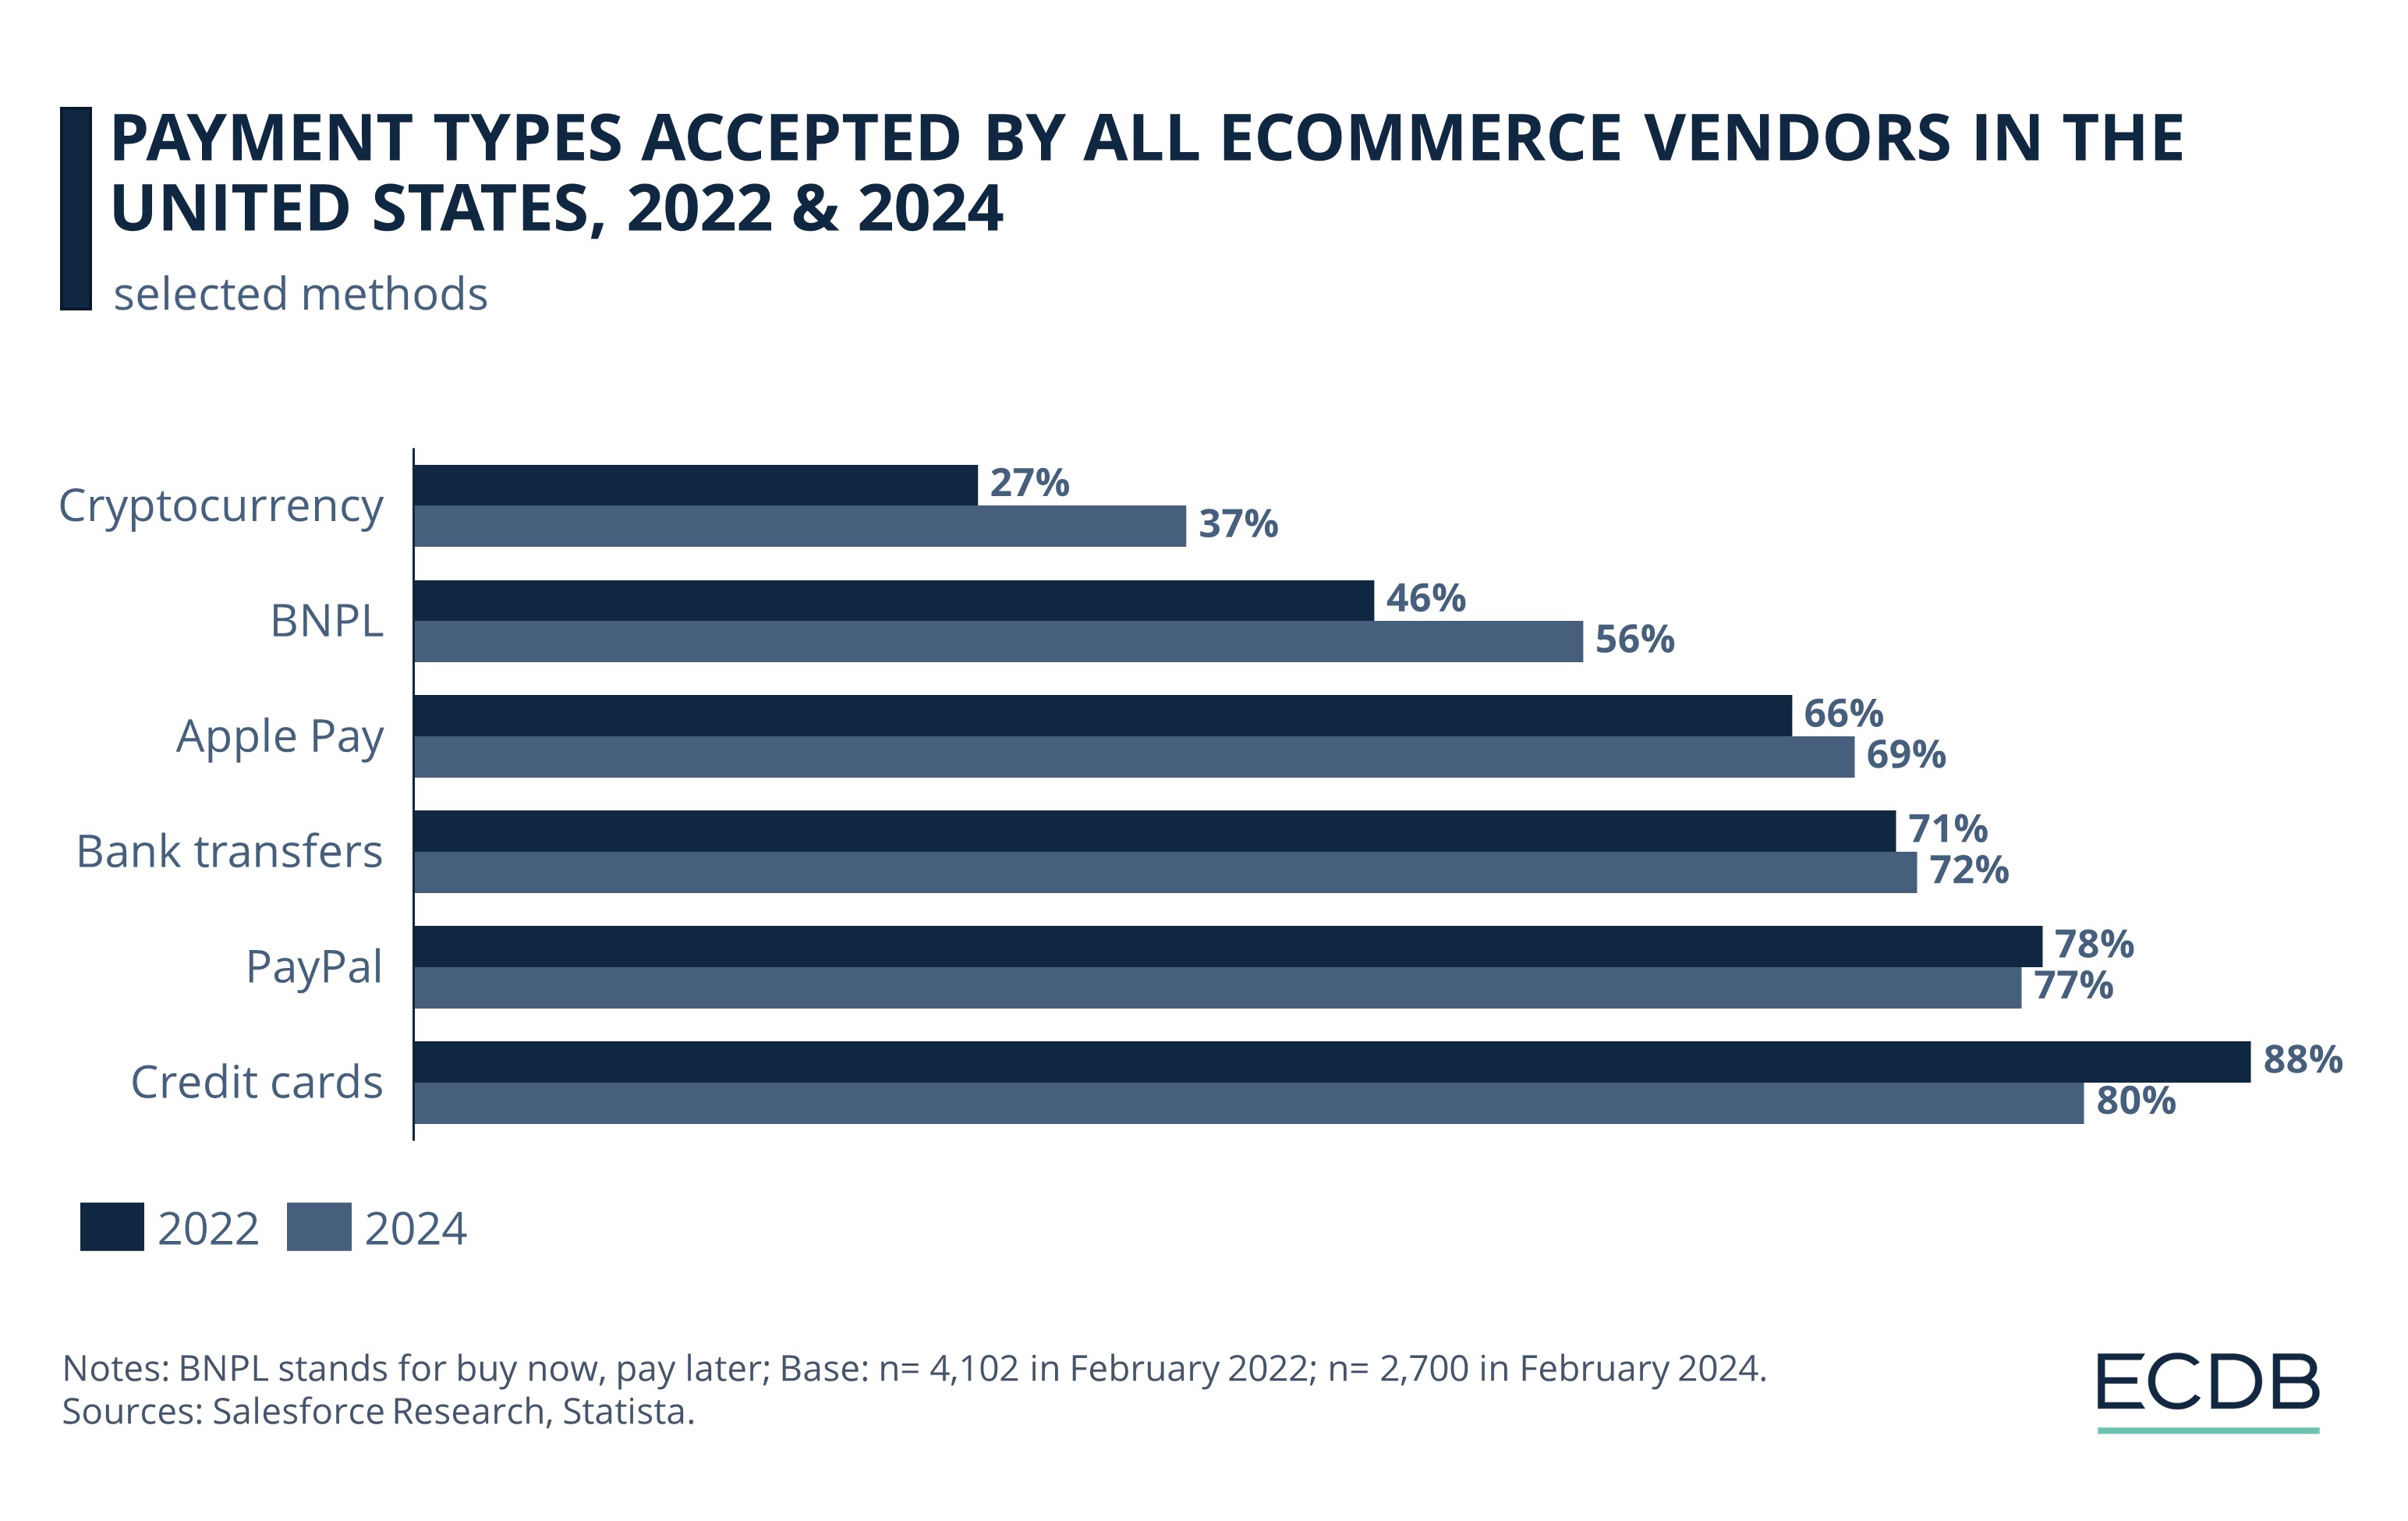 Payment Types Accepted by All Ecommerce Vendors in the United States, 2022 & 2024